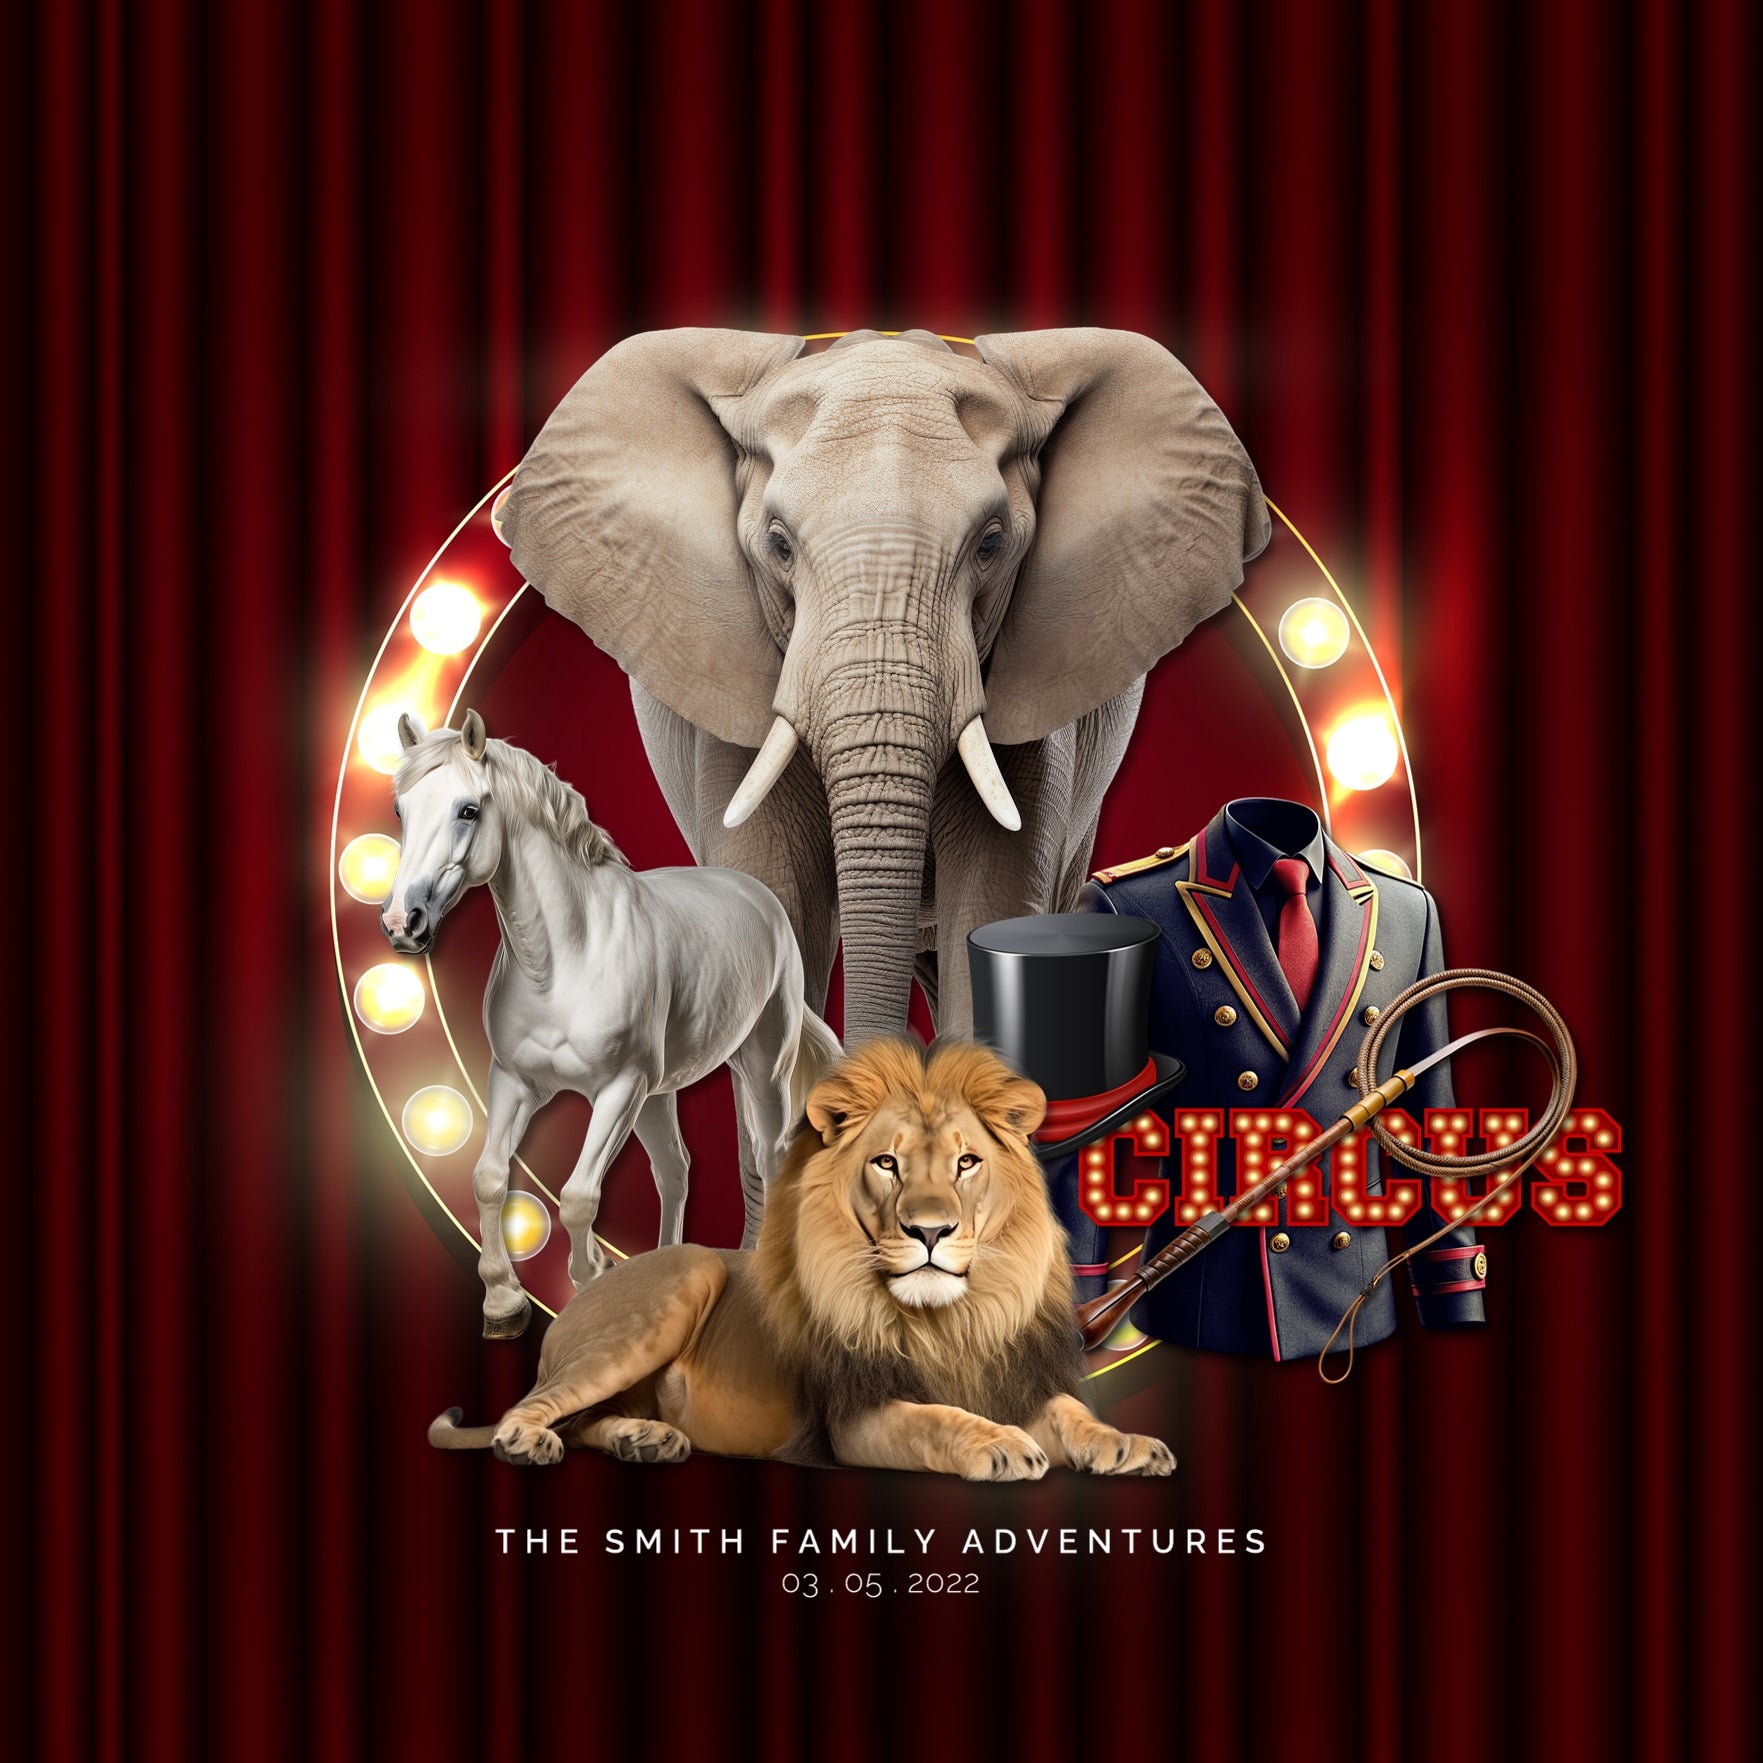 The circus is in town! Have fun celebrating your latest circus and carnival adventures with this digital scrapbooking kit by Lucky Girl Creative digital art filled with realistic animals, 3-ring circus acts, and more! Embellishments include animals, bear, cheetah, elephant, horse, lion, lioness, monkey, chimpanzee, white tiger, tiger, zebra, balance board, ball, balloon animal, bleachers, grandstands, ringmaster, BMX bike, bicycle, bowler hat, cannon, sign, Chinese drum, aerial, highwire, clown, and more.